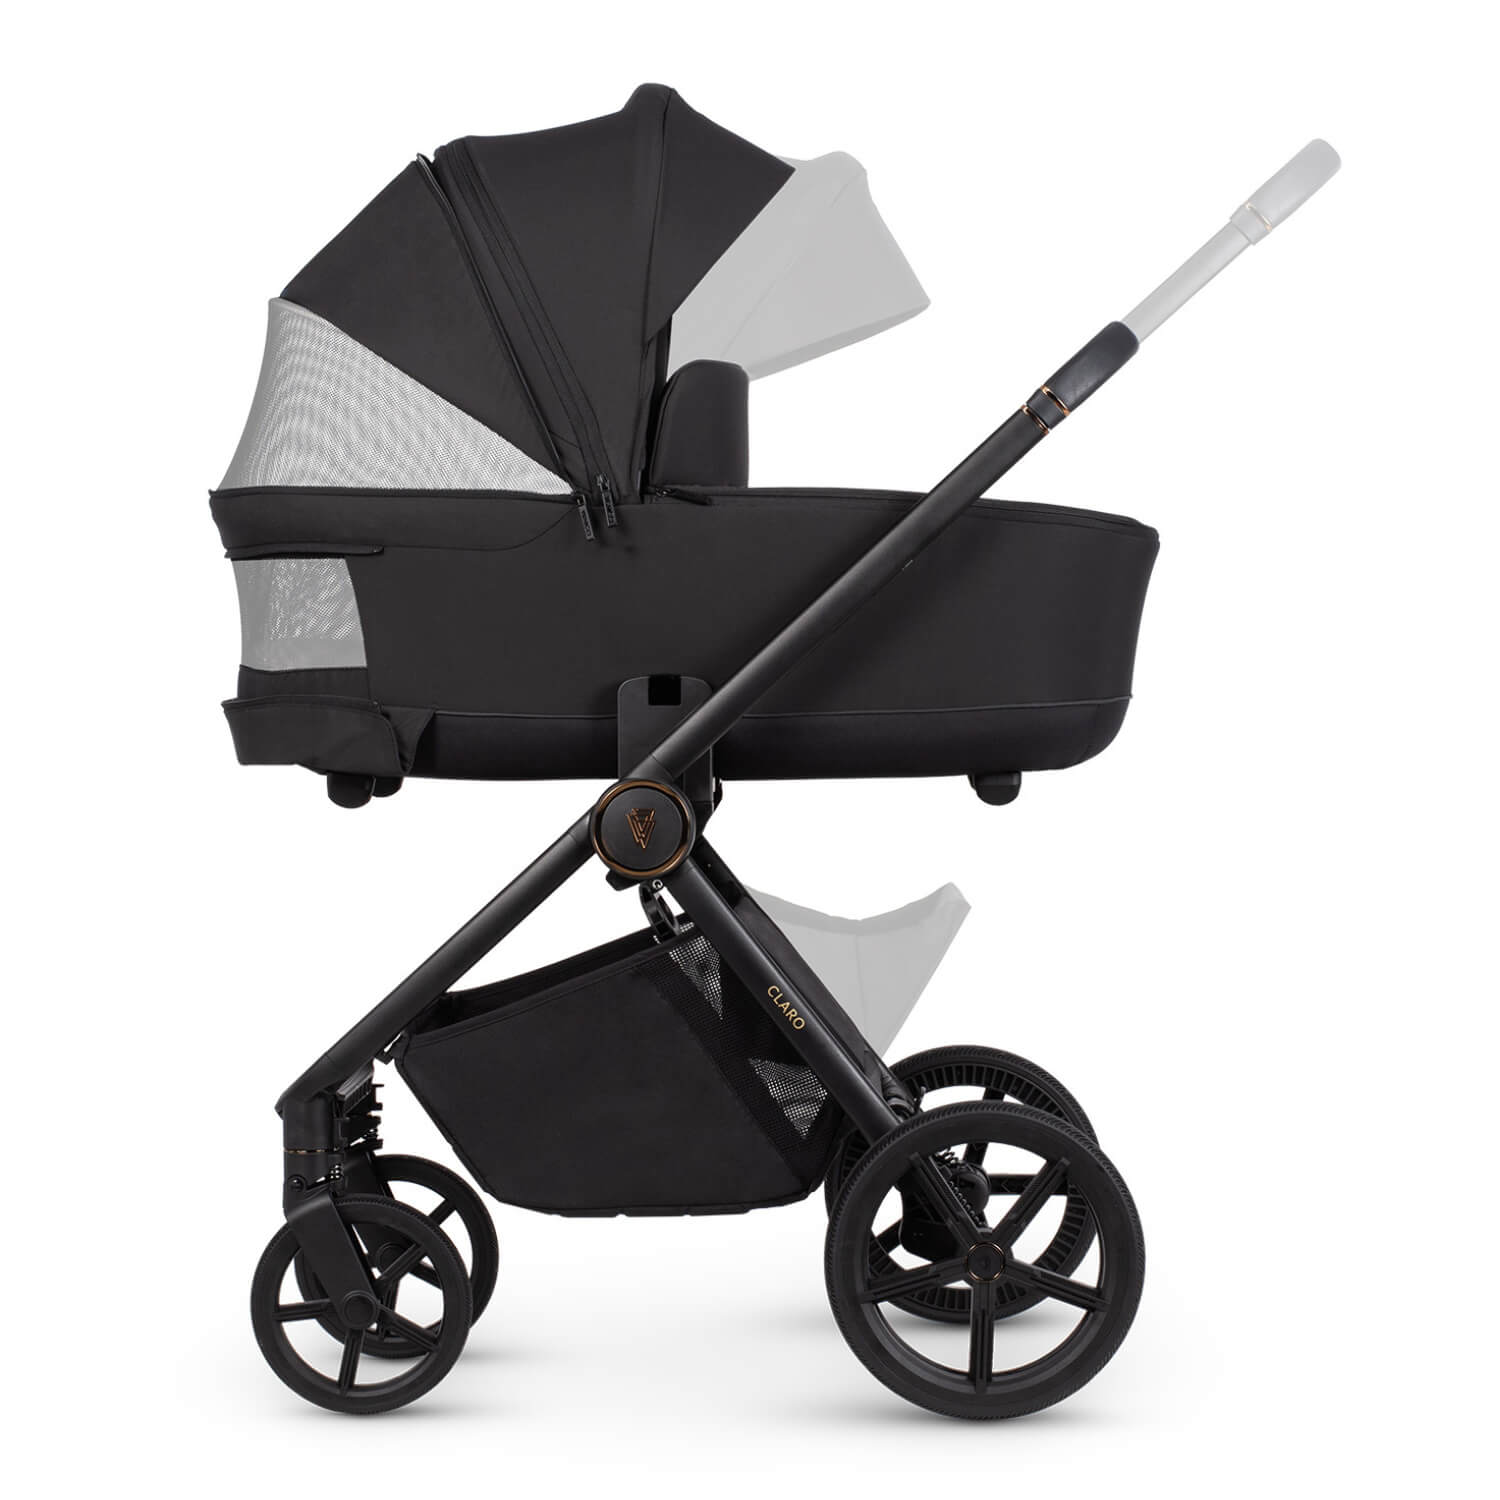 Venicci Claro carrycot in Noir black with the panoramic ventilation opened